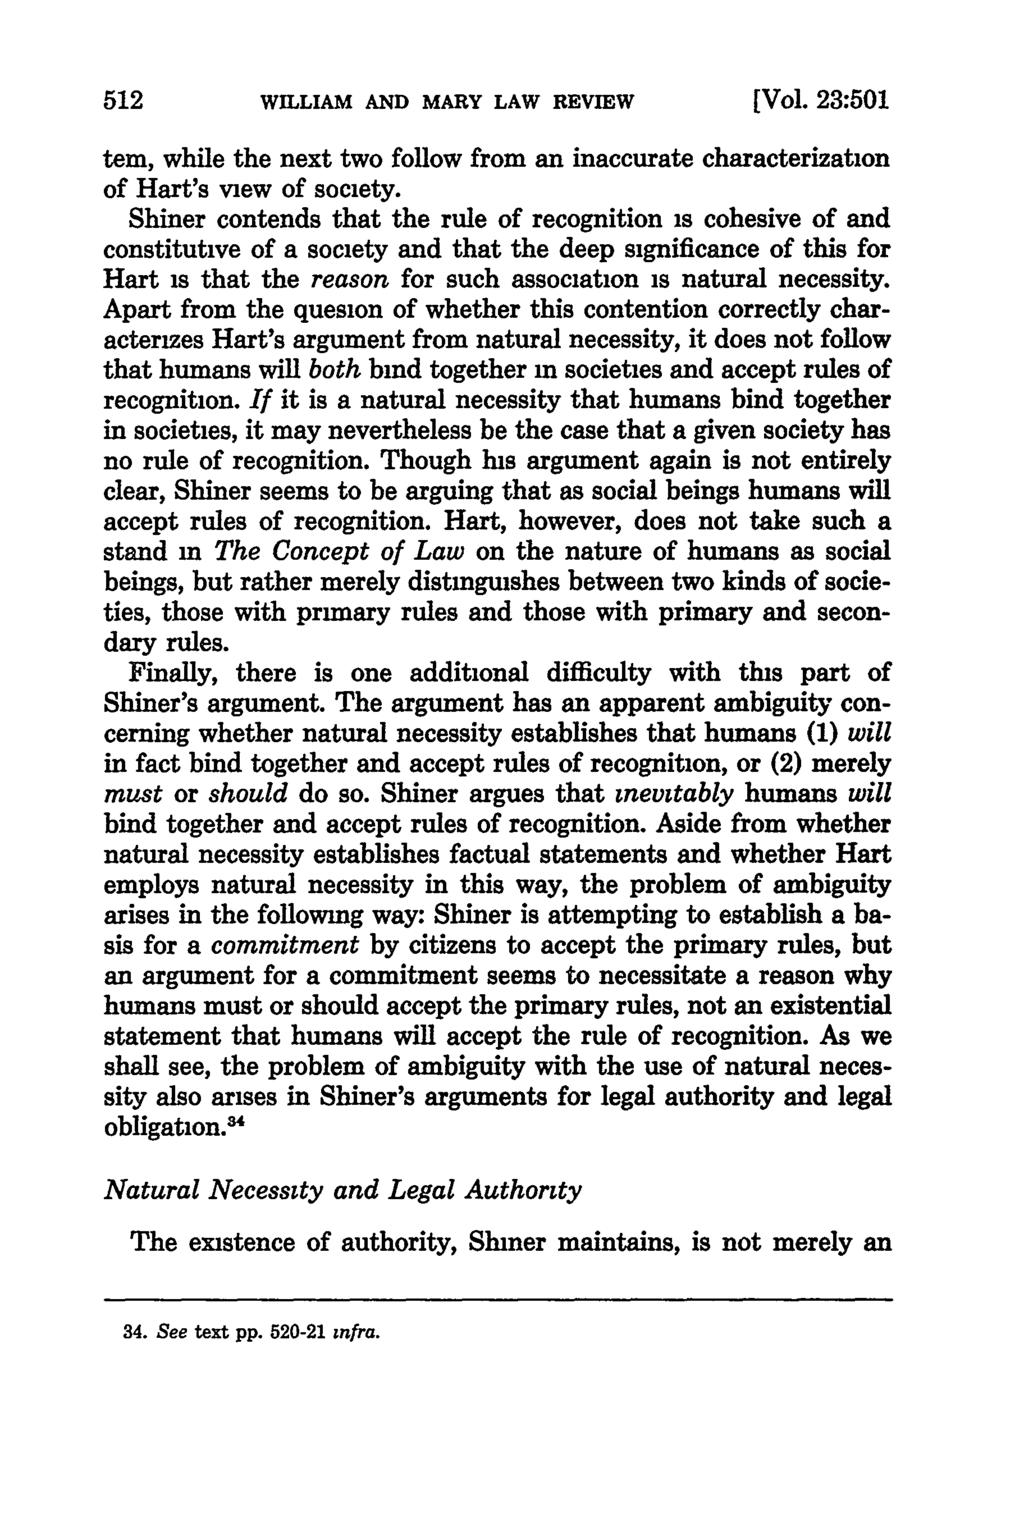 WILLIAM AND MARY LAW REVIEW [Vol. 23:501 tern, while the next two follow from an inaccurate characterization of Hart's view of society.